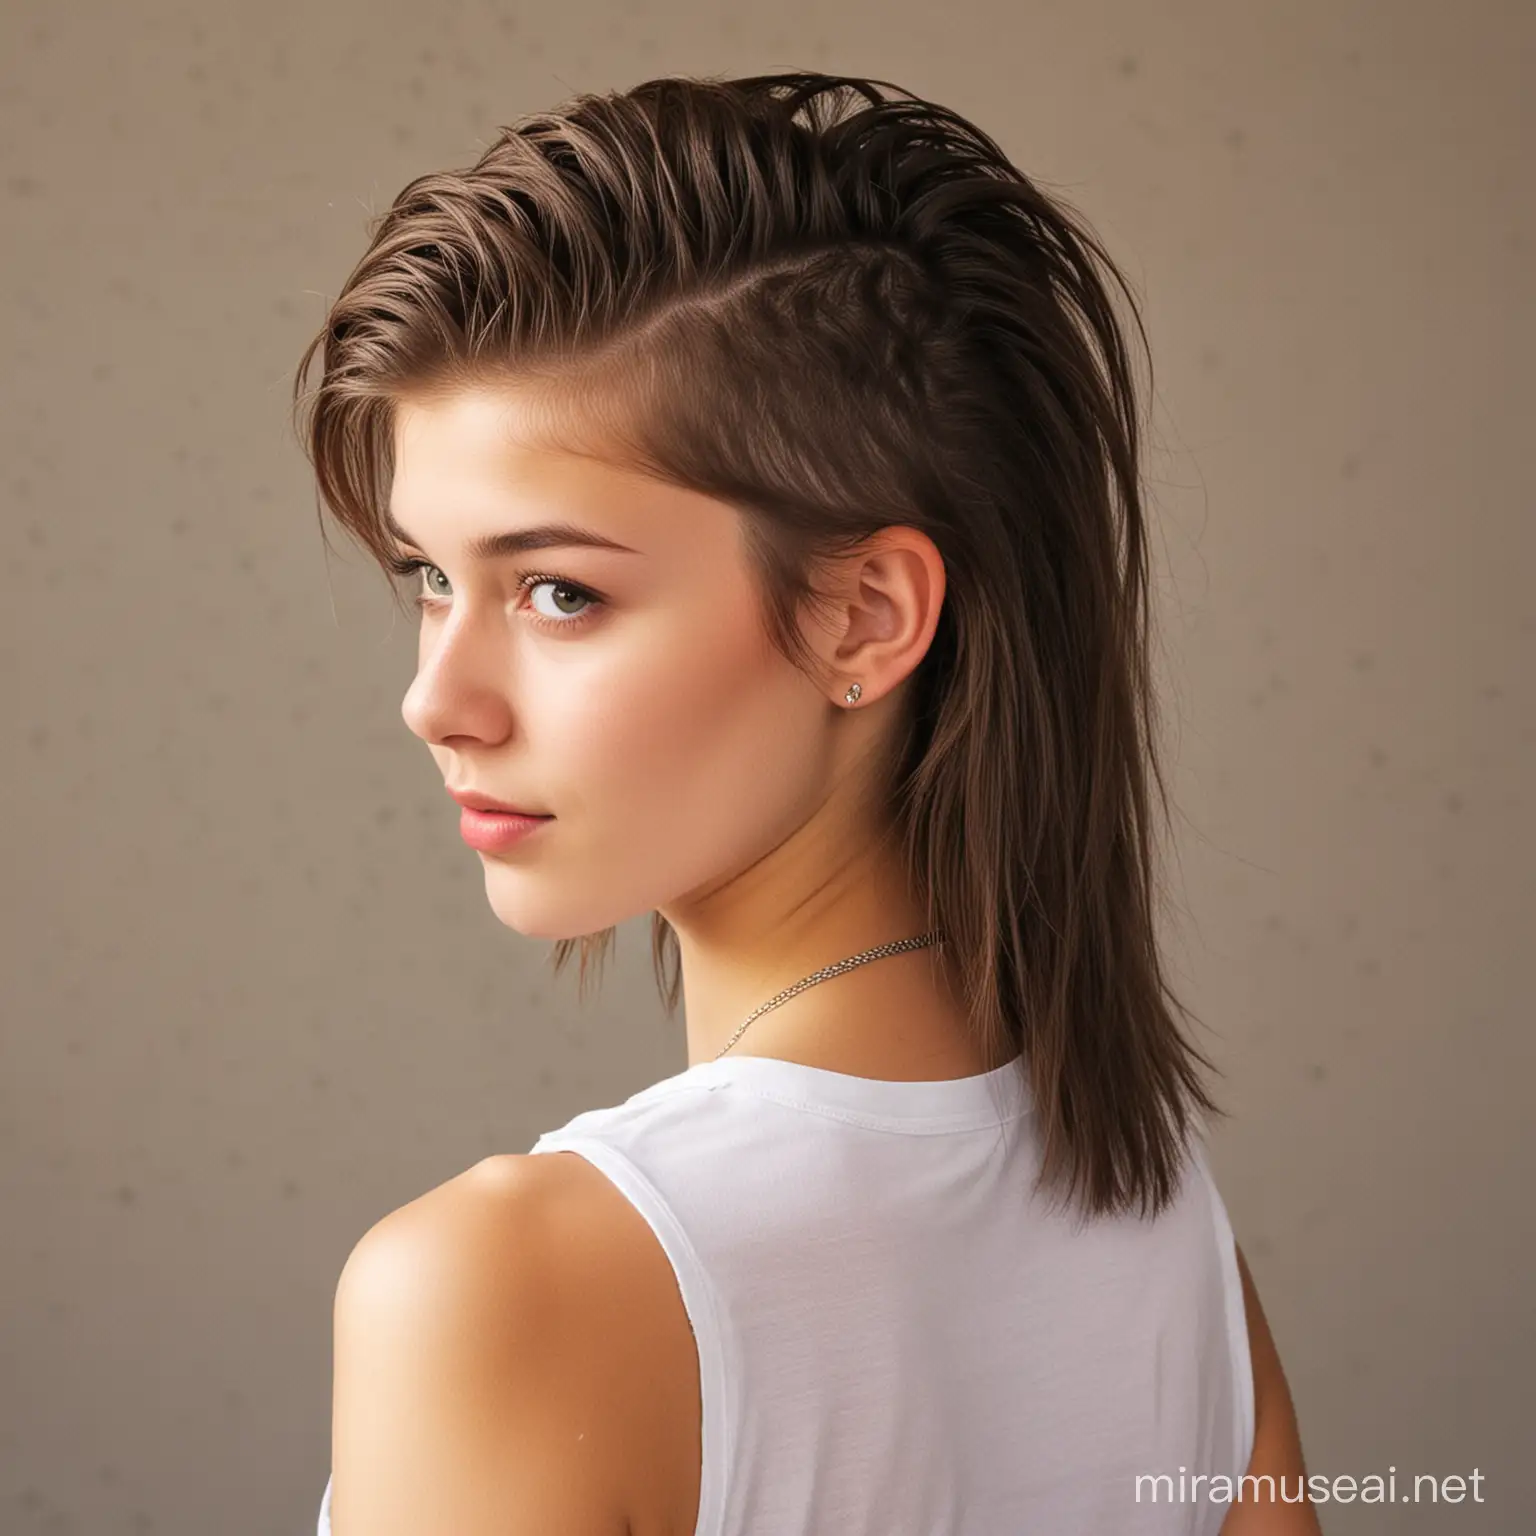 Stylish 18YearOld Girl with a Trendy Mullet Haircut